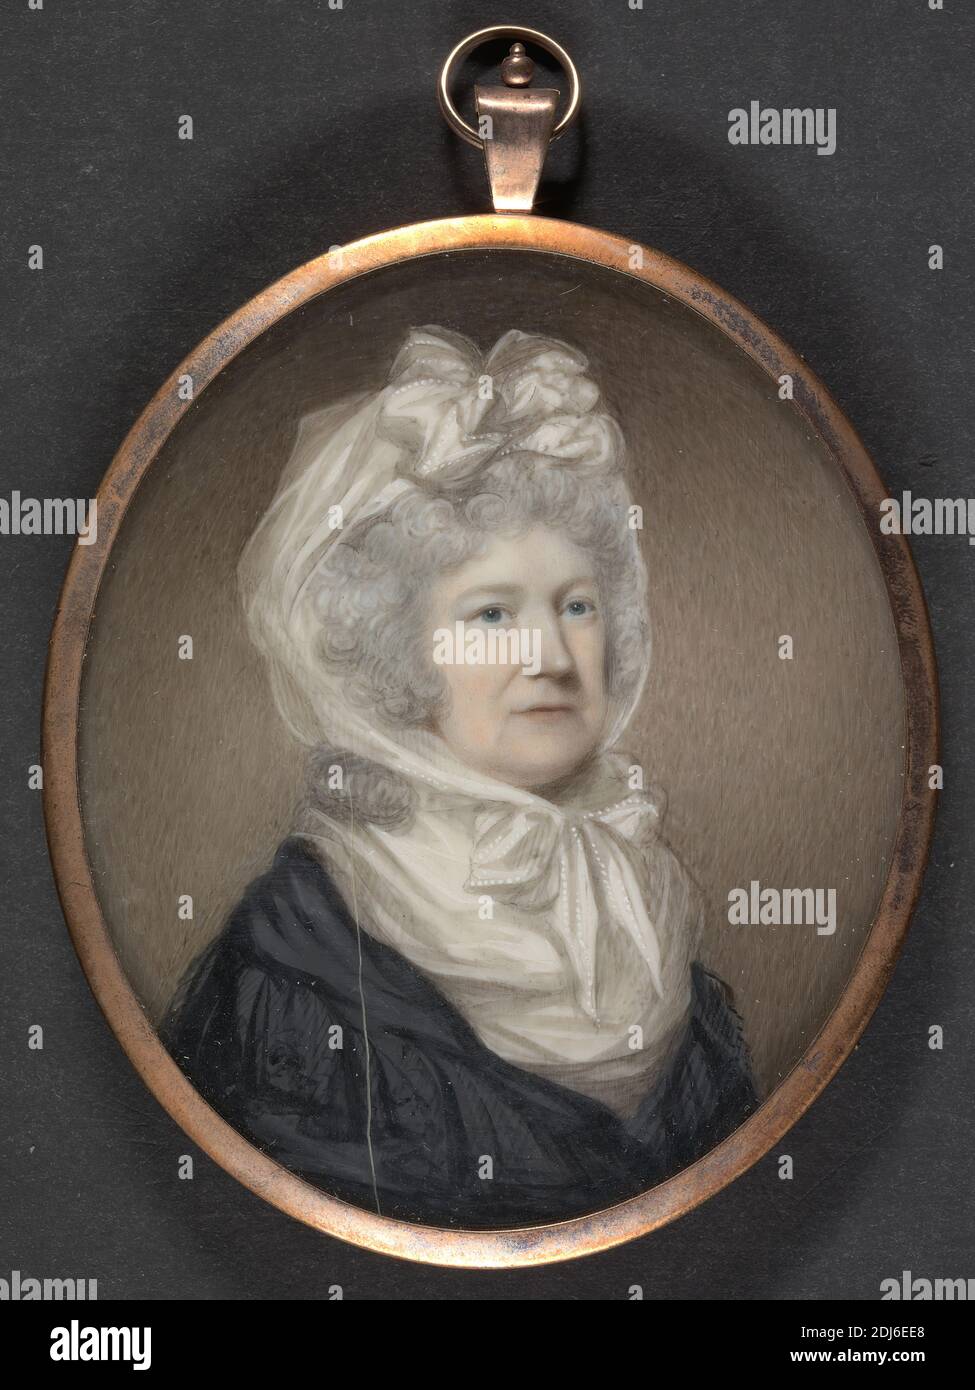 Anne Goodriche, Wife of Thomas Percy, Bishop of Dromore, Thomas Langdon, active 1800, British, 1793, Watercolor, gouache and gum arabic on ivory in rose gold locket with hanger, Image: 3 3/8 × 2 3/4 inches (8.5 × 7 cm), bonnet, portrait Stock Photo